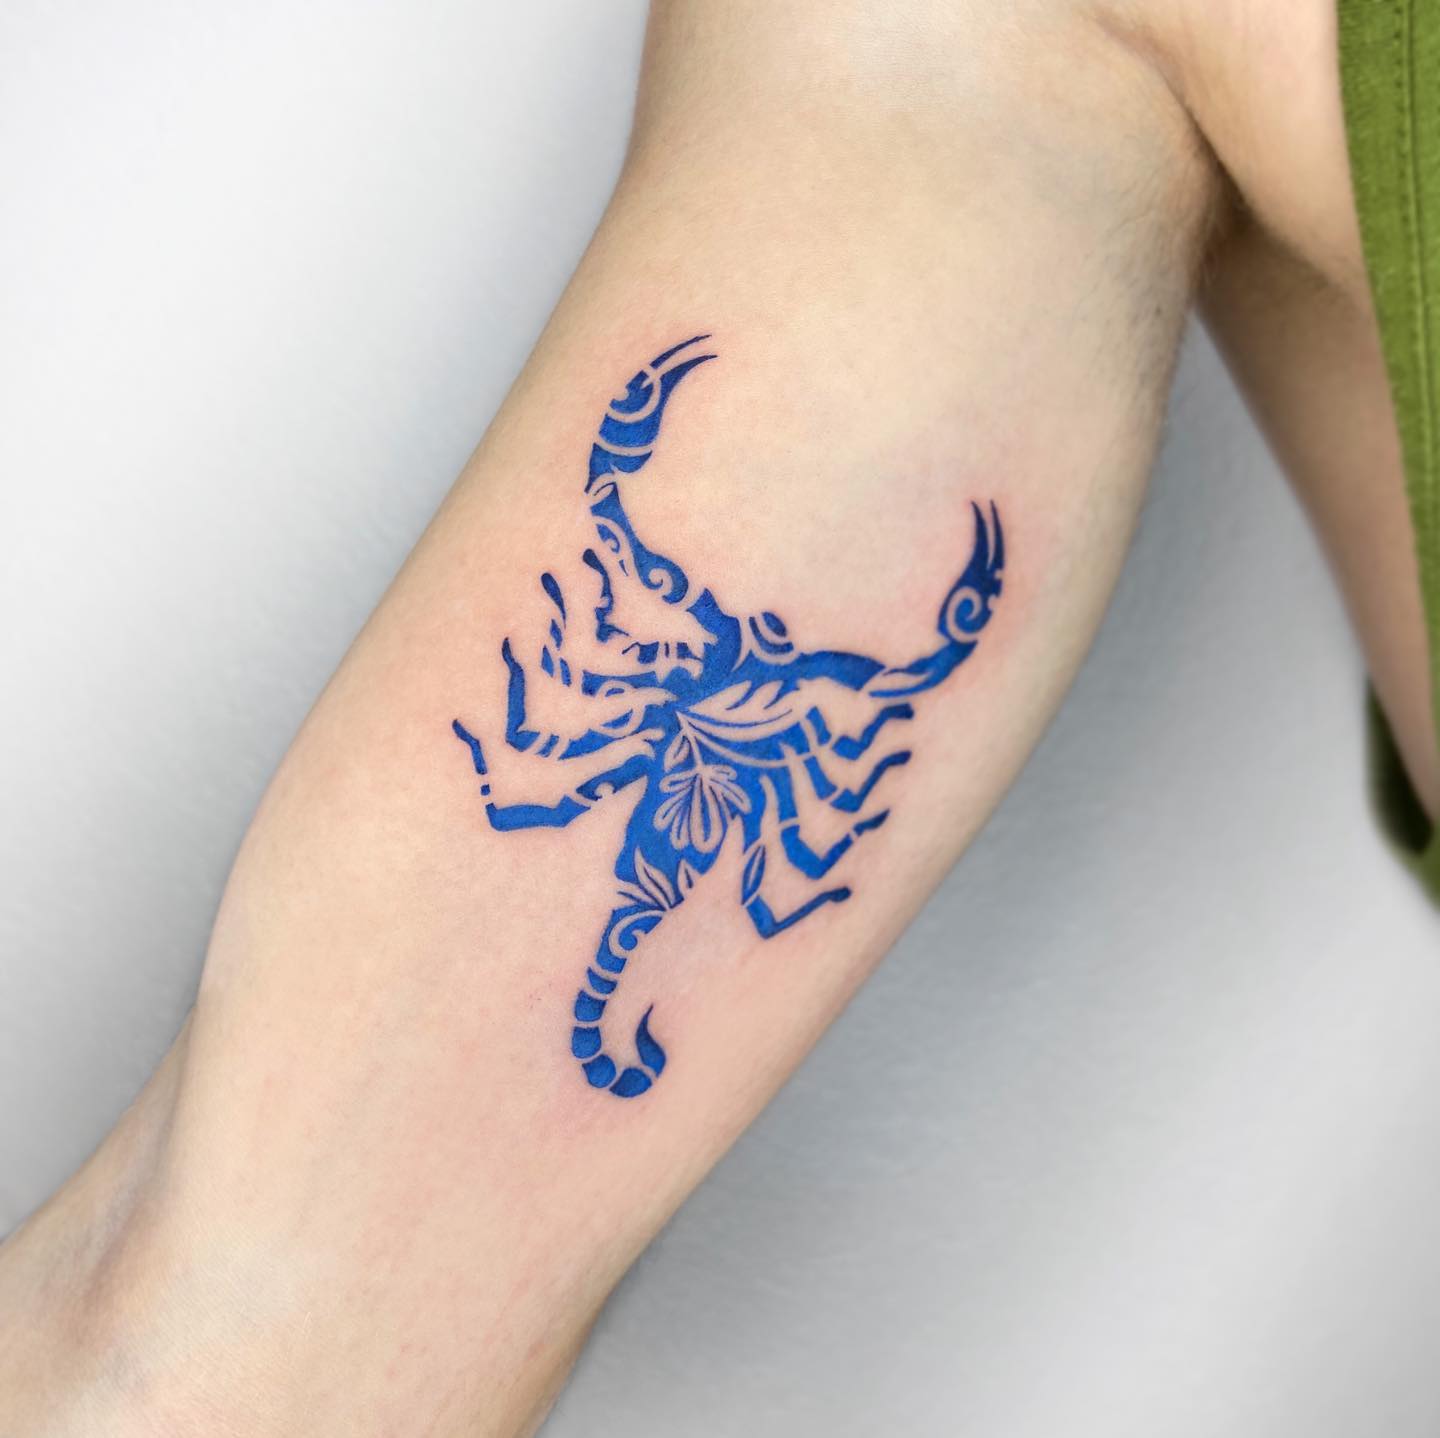 3D (The Canvas Arts) Temporary Tattoo Waterproof For Men & Women, Wrist,  Arm Hand, Back, Navel (Scorpion Tattoo) Size 21X15 cm HB-053 : Amazon.in:  Beauty